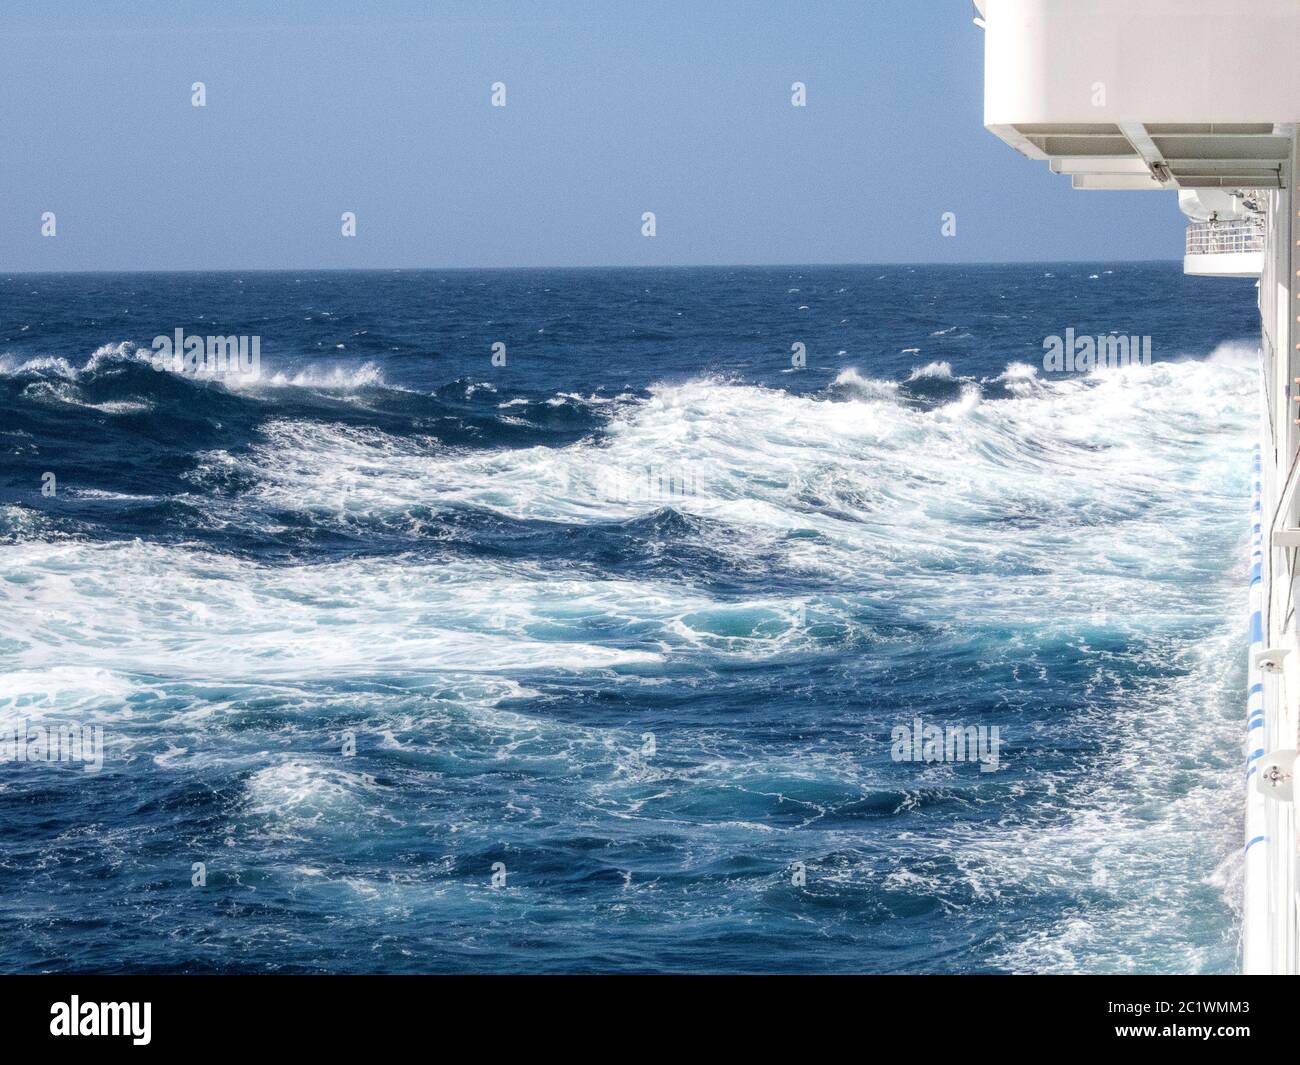 Spain, Stormy waves in the Mediterranean Sea Stock Photo